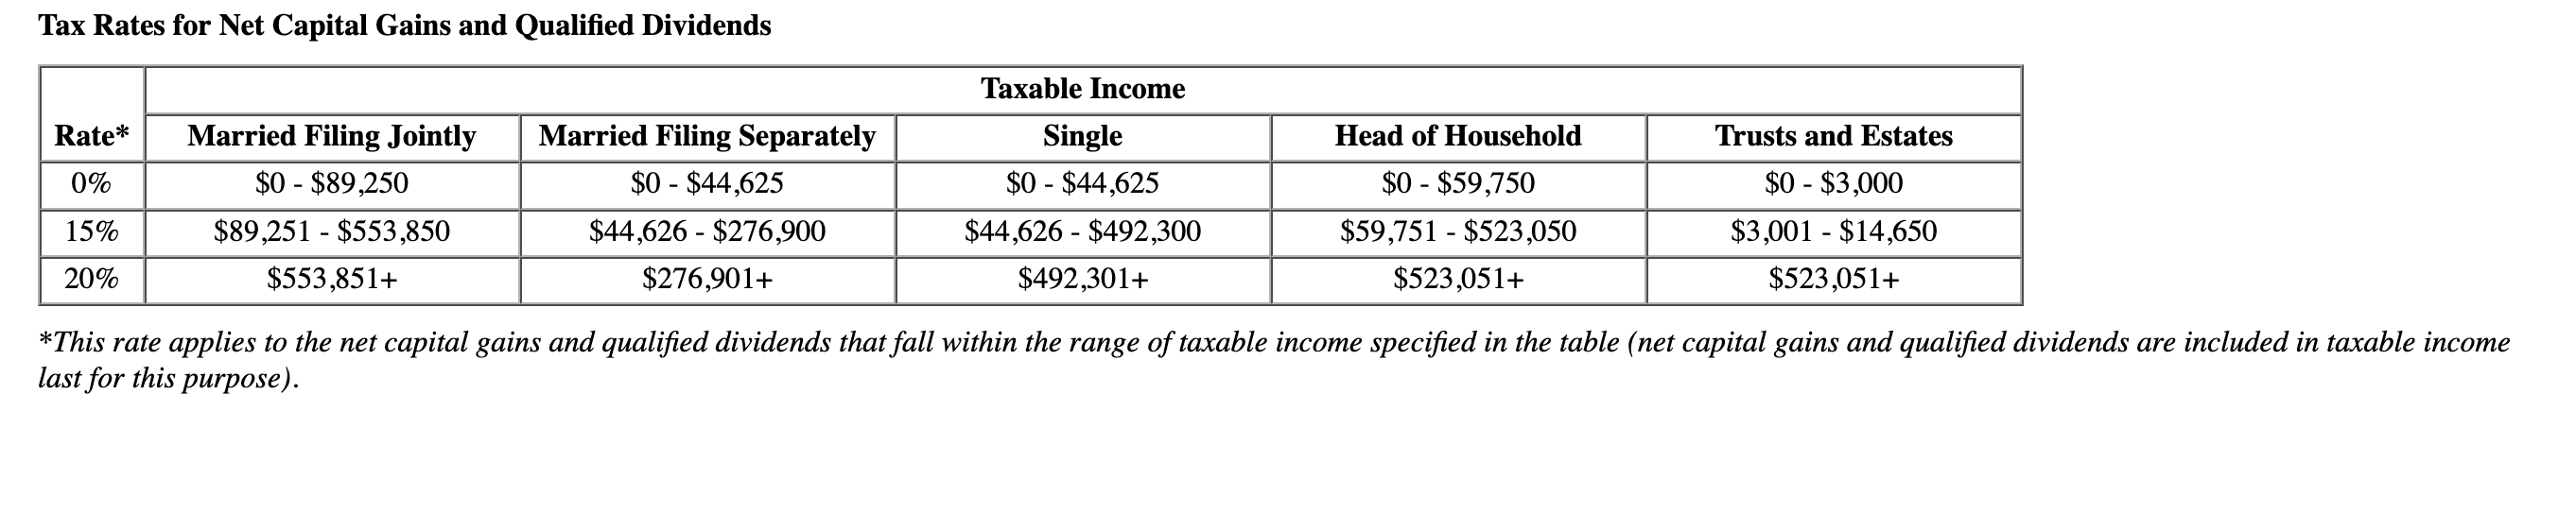 Tax Rates for Net Capital Gains and Qualified Dividends Rate* 0% 15% 20% Married Filing Jointly $0 - $89,250